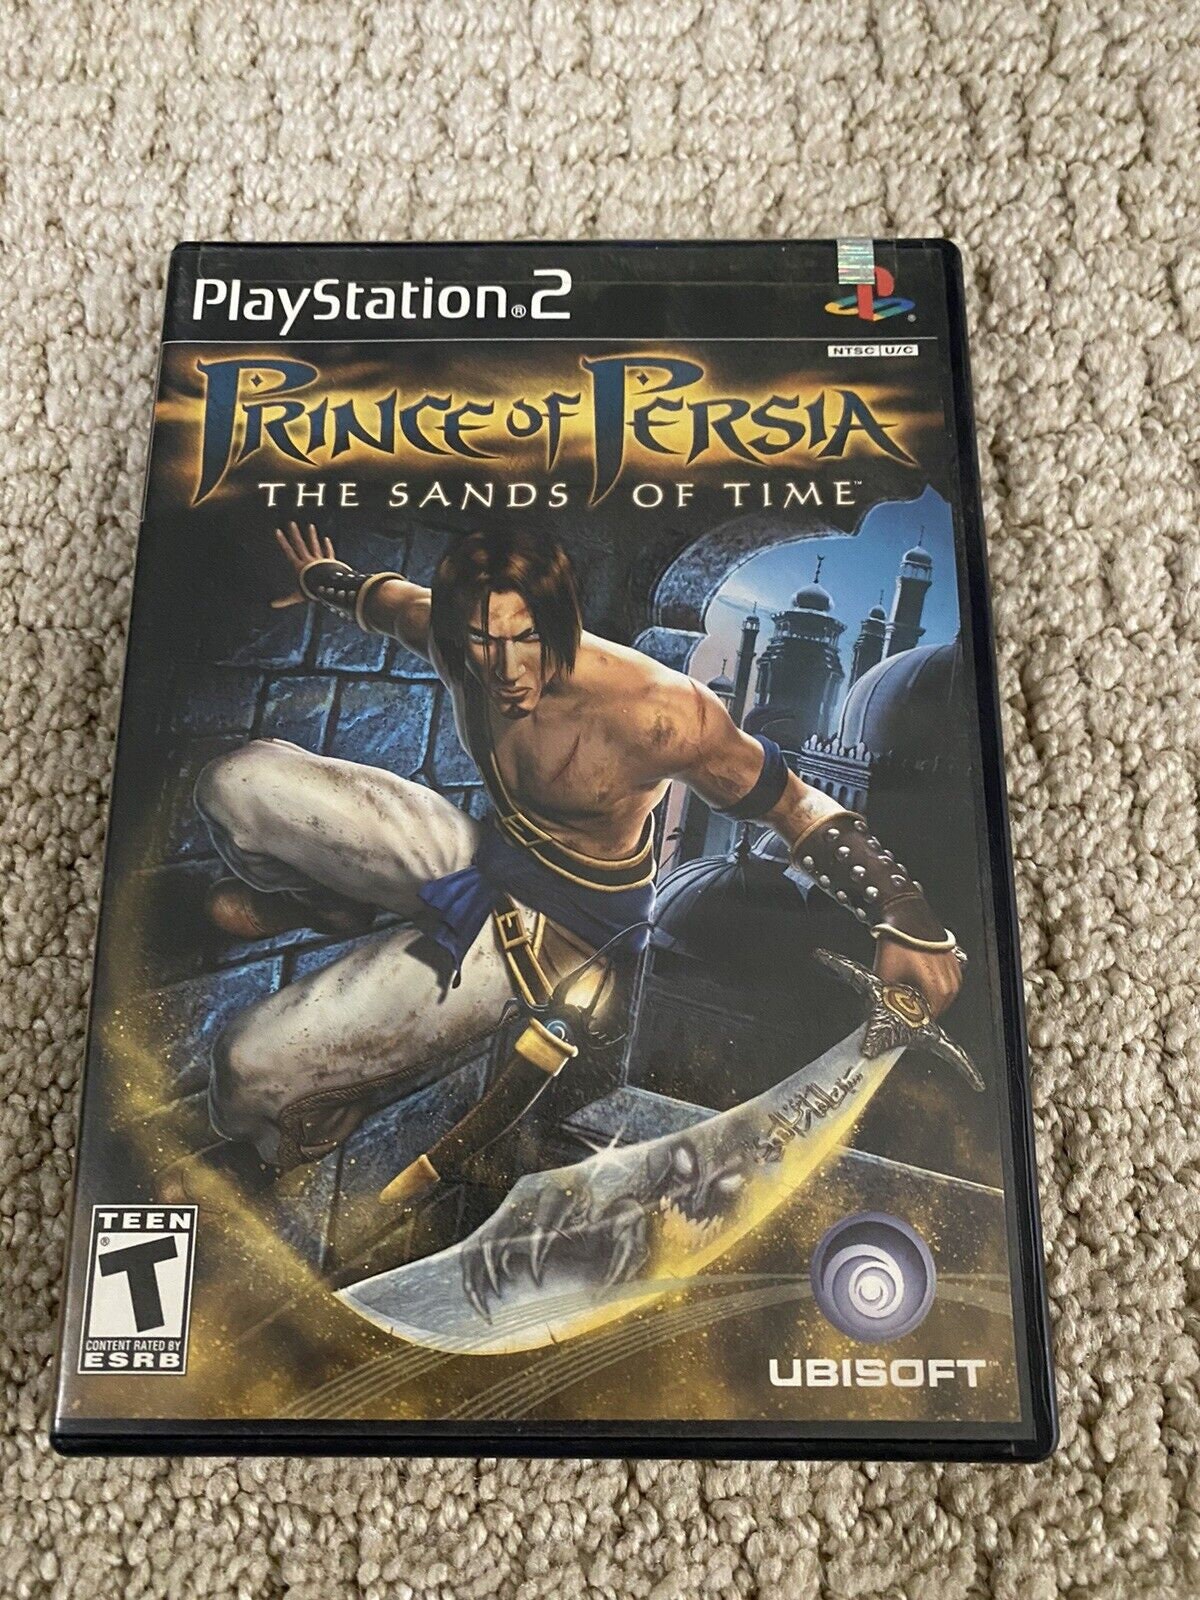 Prince of Persia: Warrior Within (PS2) - The Cover Project